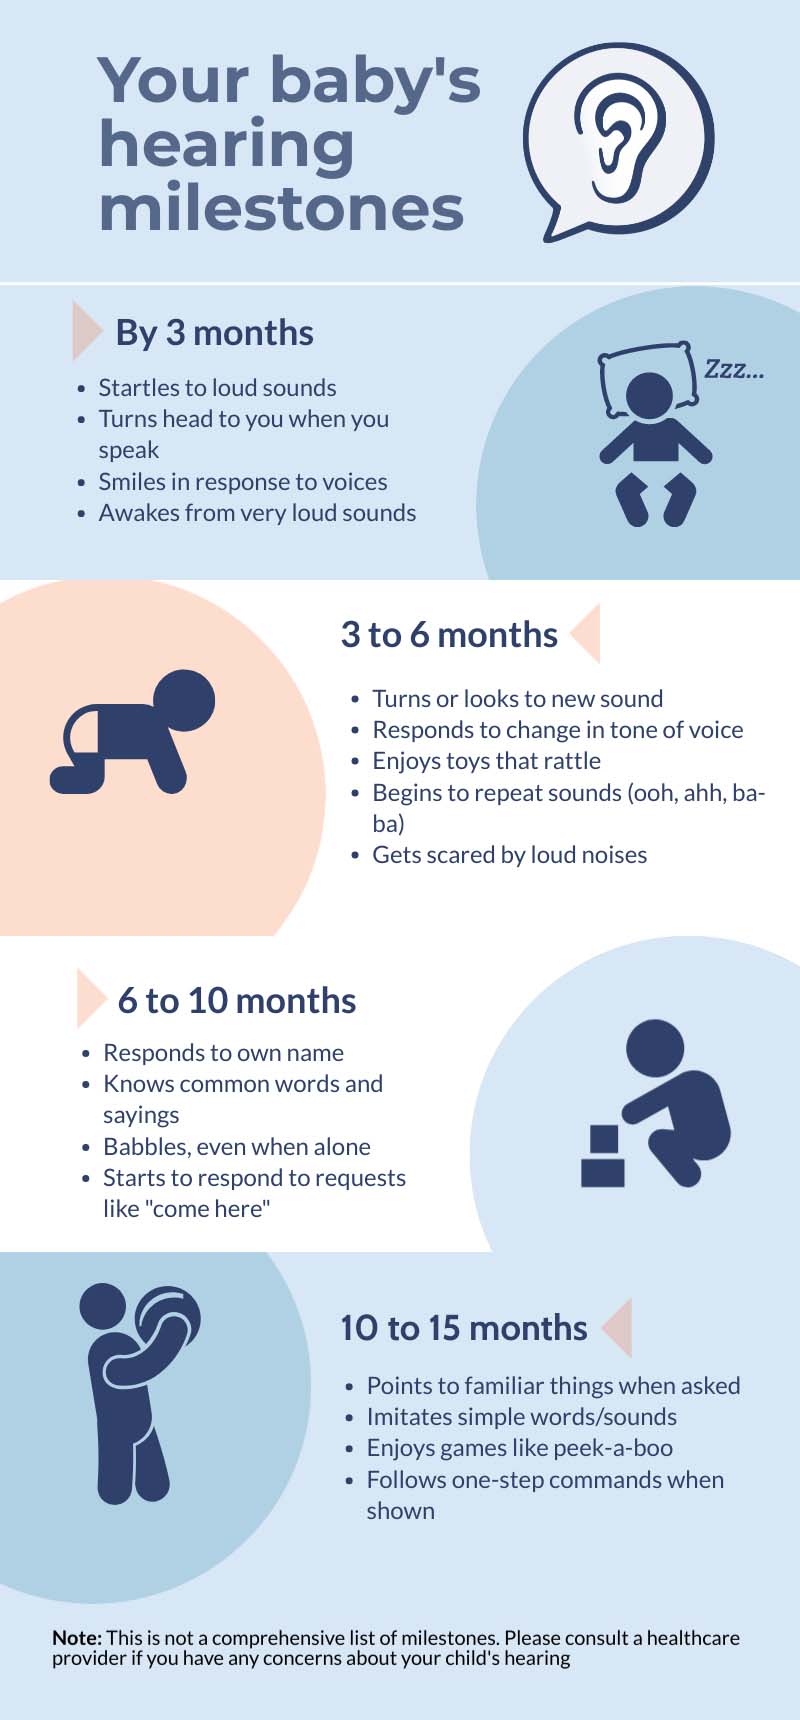 Infographic on a baby's hearing milestones: birth to 15 months